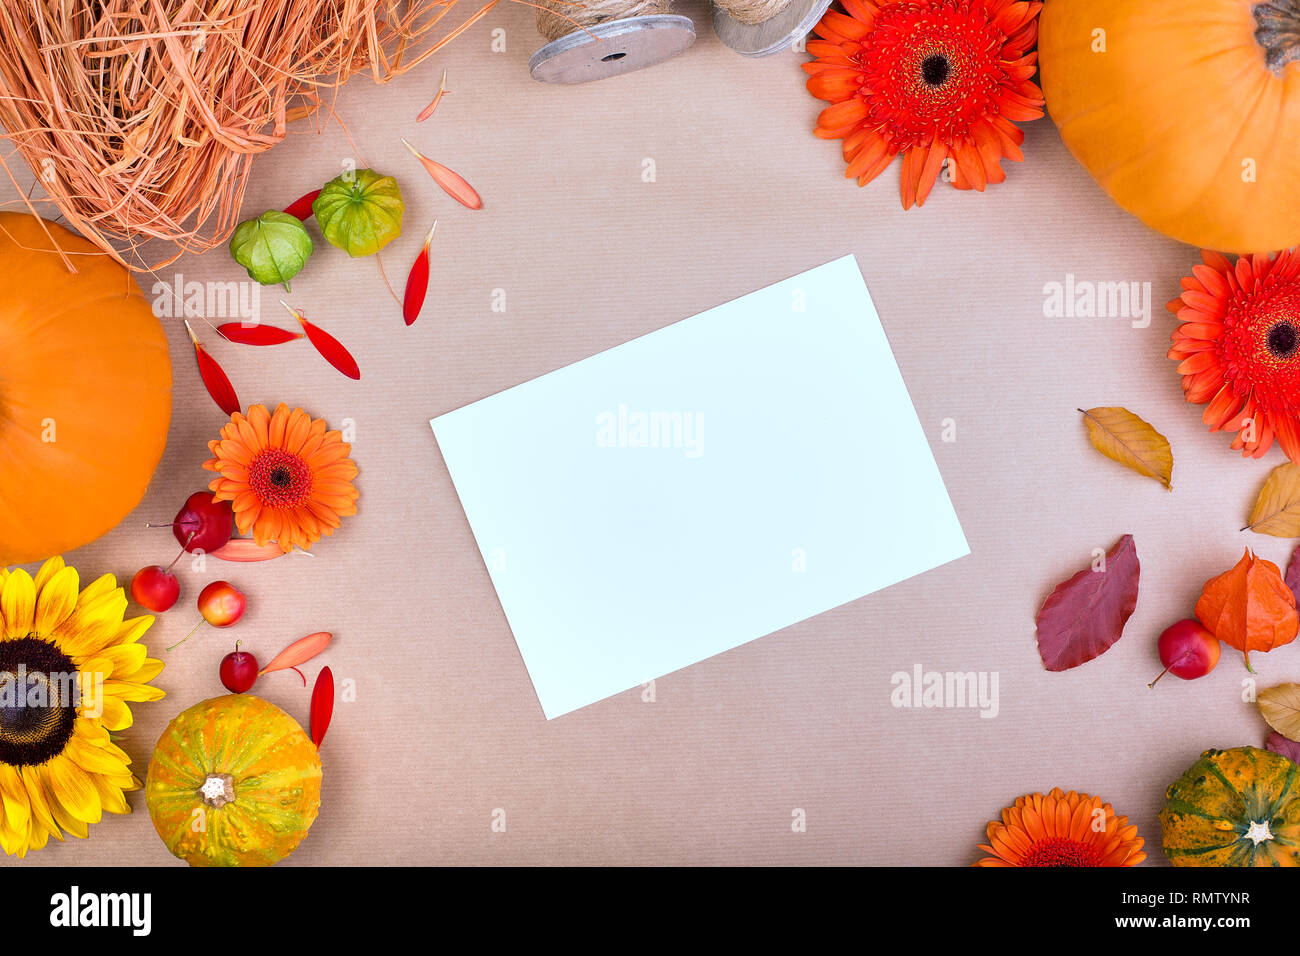 Download Top View Of Handcraft Gift Box Yellow And Orange Flowers And Pumpkins On Rose Background Blank Greeting Card For Creative Work Design Flat Lay Stock Photo Alamy PSD Mockup Templates